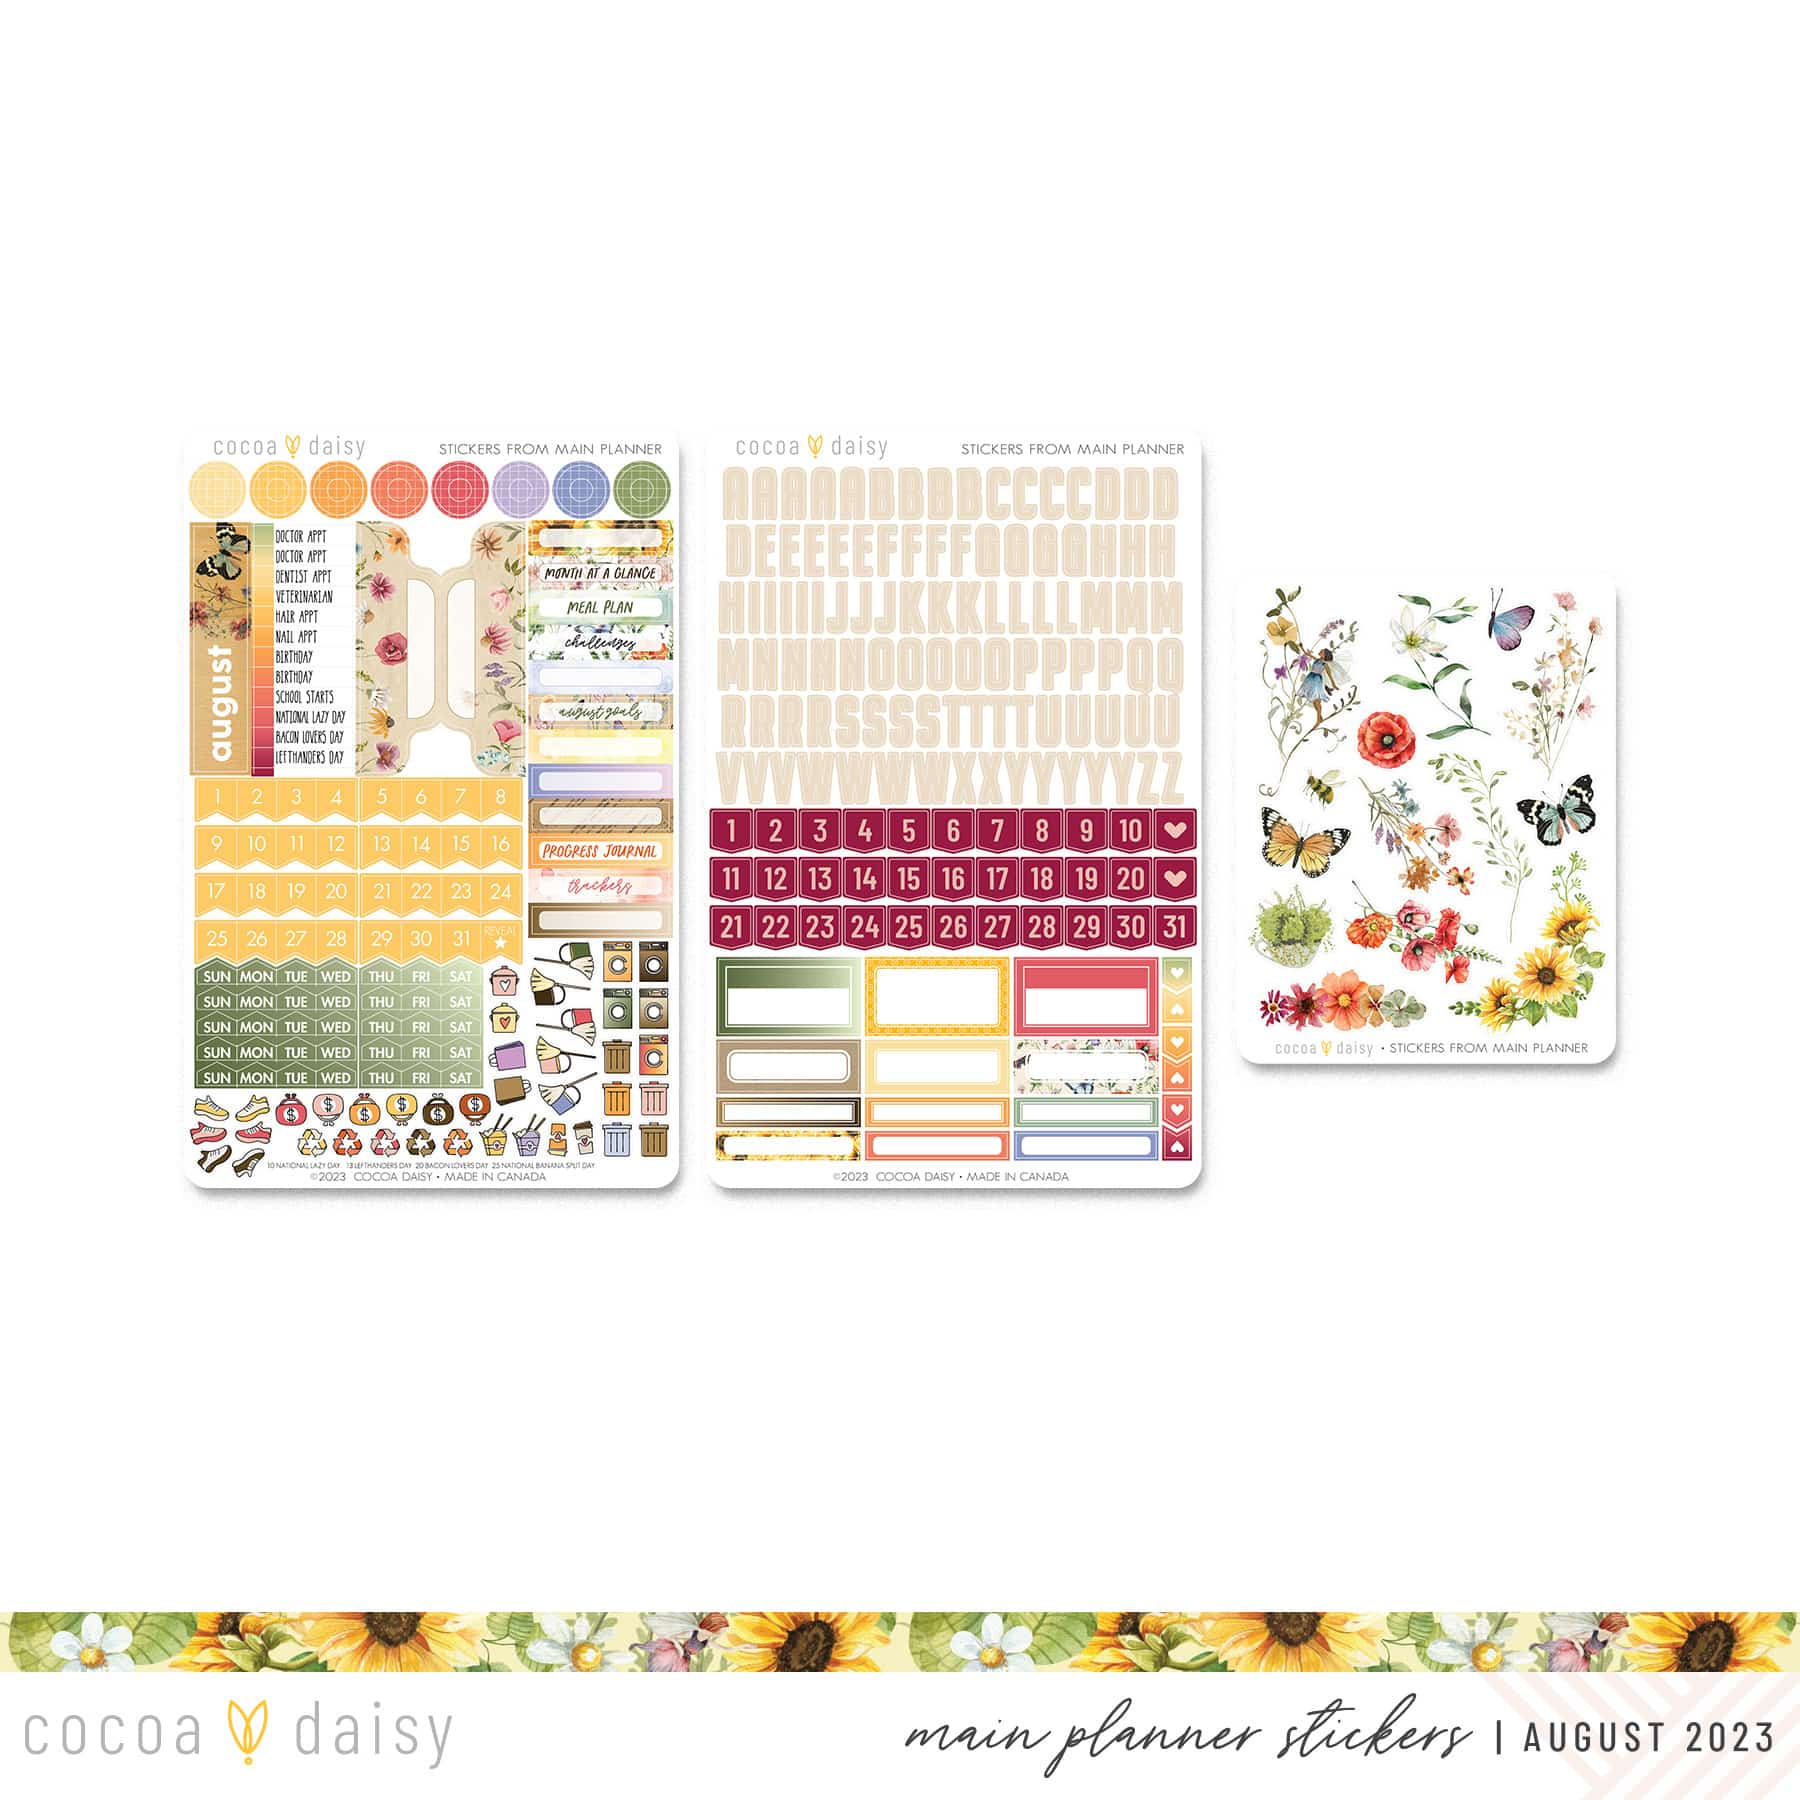 Quiet Meadow Stickers from Main Planner August 2023